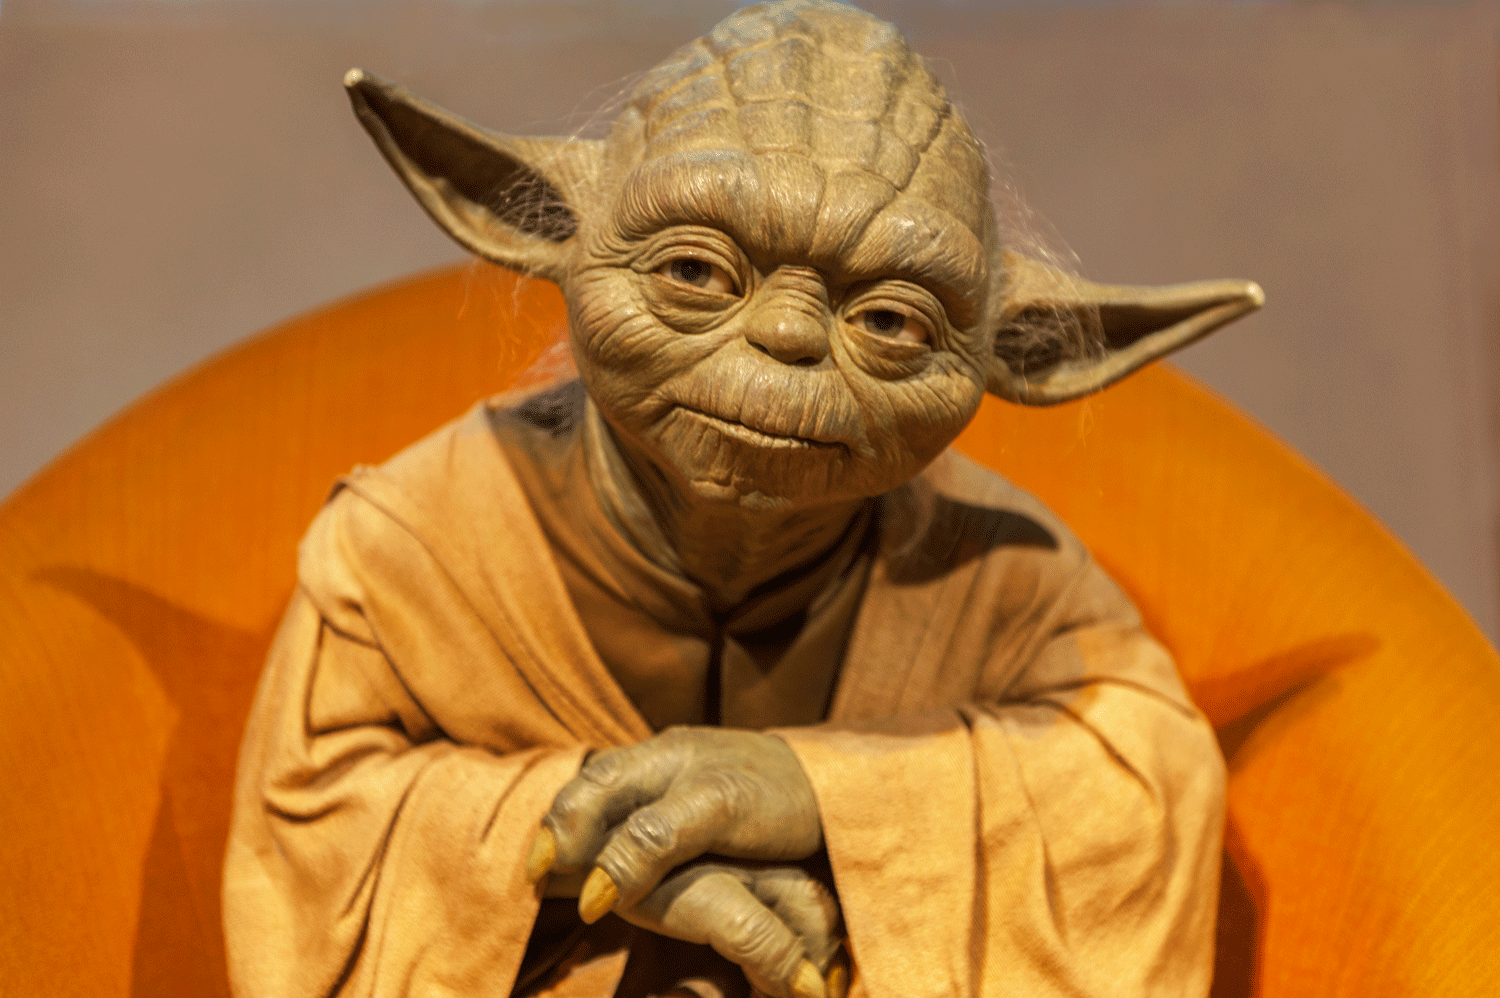 Even Yoda can offer advice about the utility of failureBoxBrownie.com